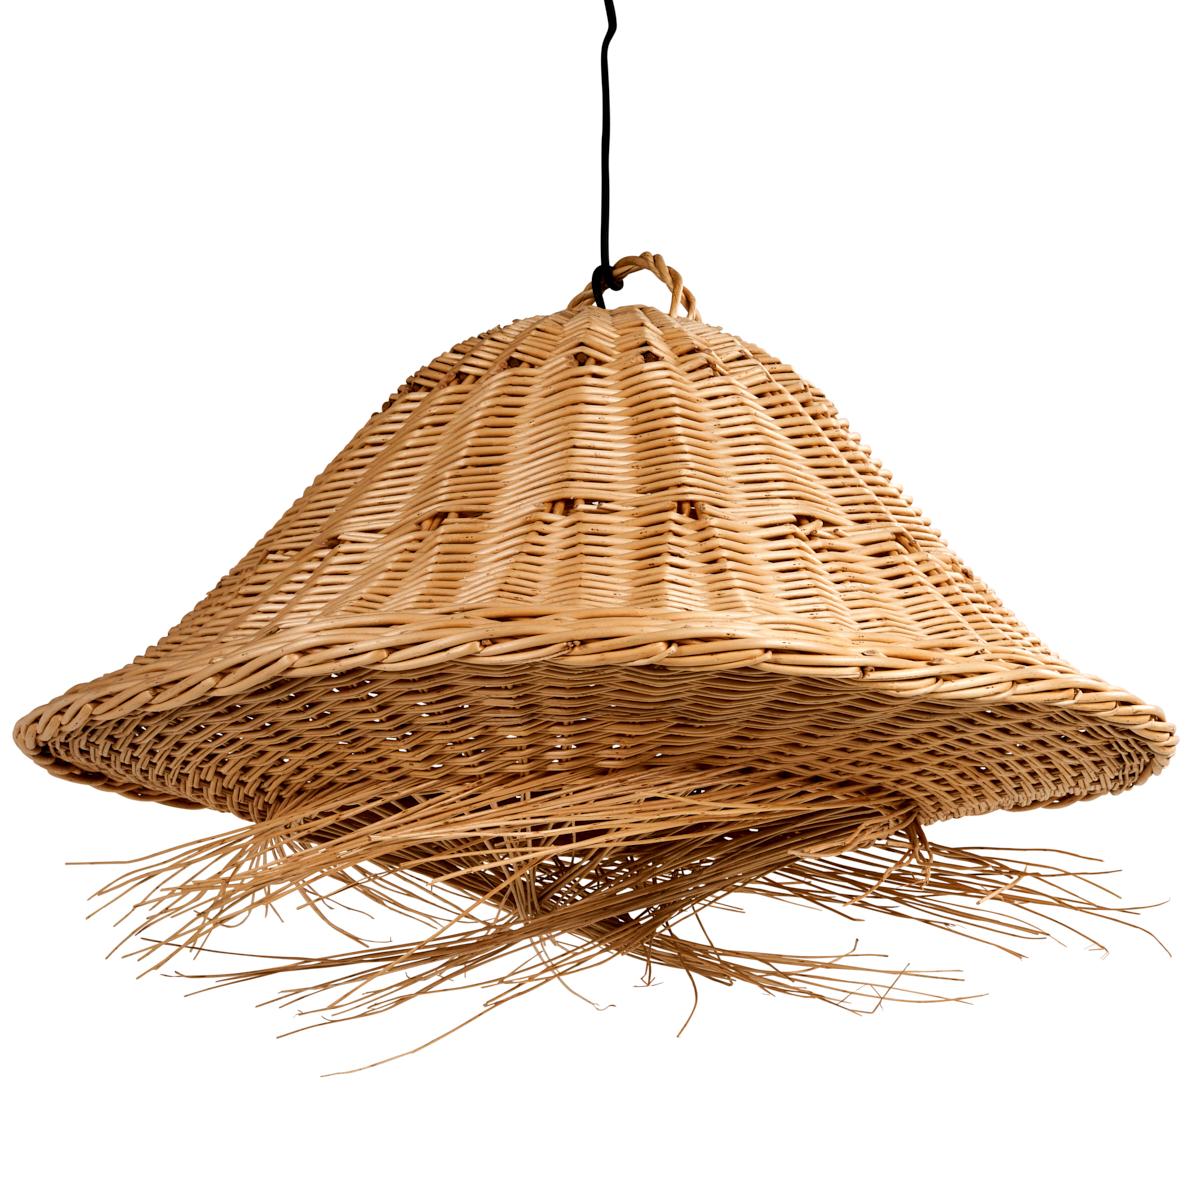 A unique find from the south of France, this fabulous wicker pendant is crafted in an unusual bell shape with a spray of unwoven twisting straw at its base. At once modern and rustic, this pendant is perfect for a beach house and a wonderful way to